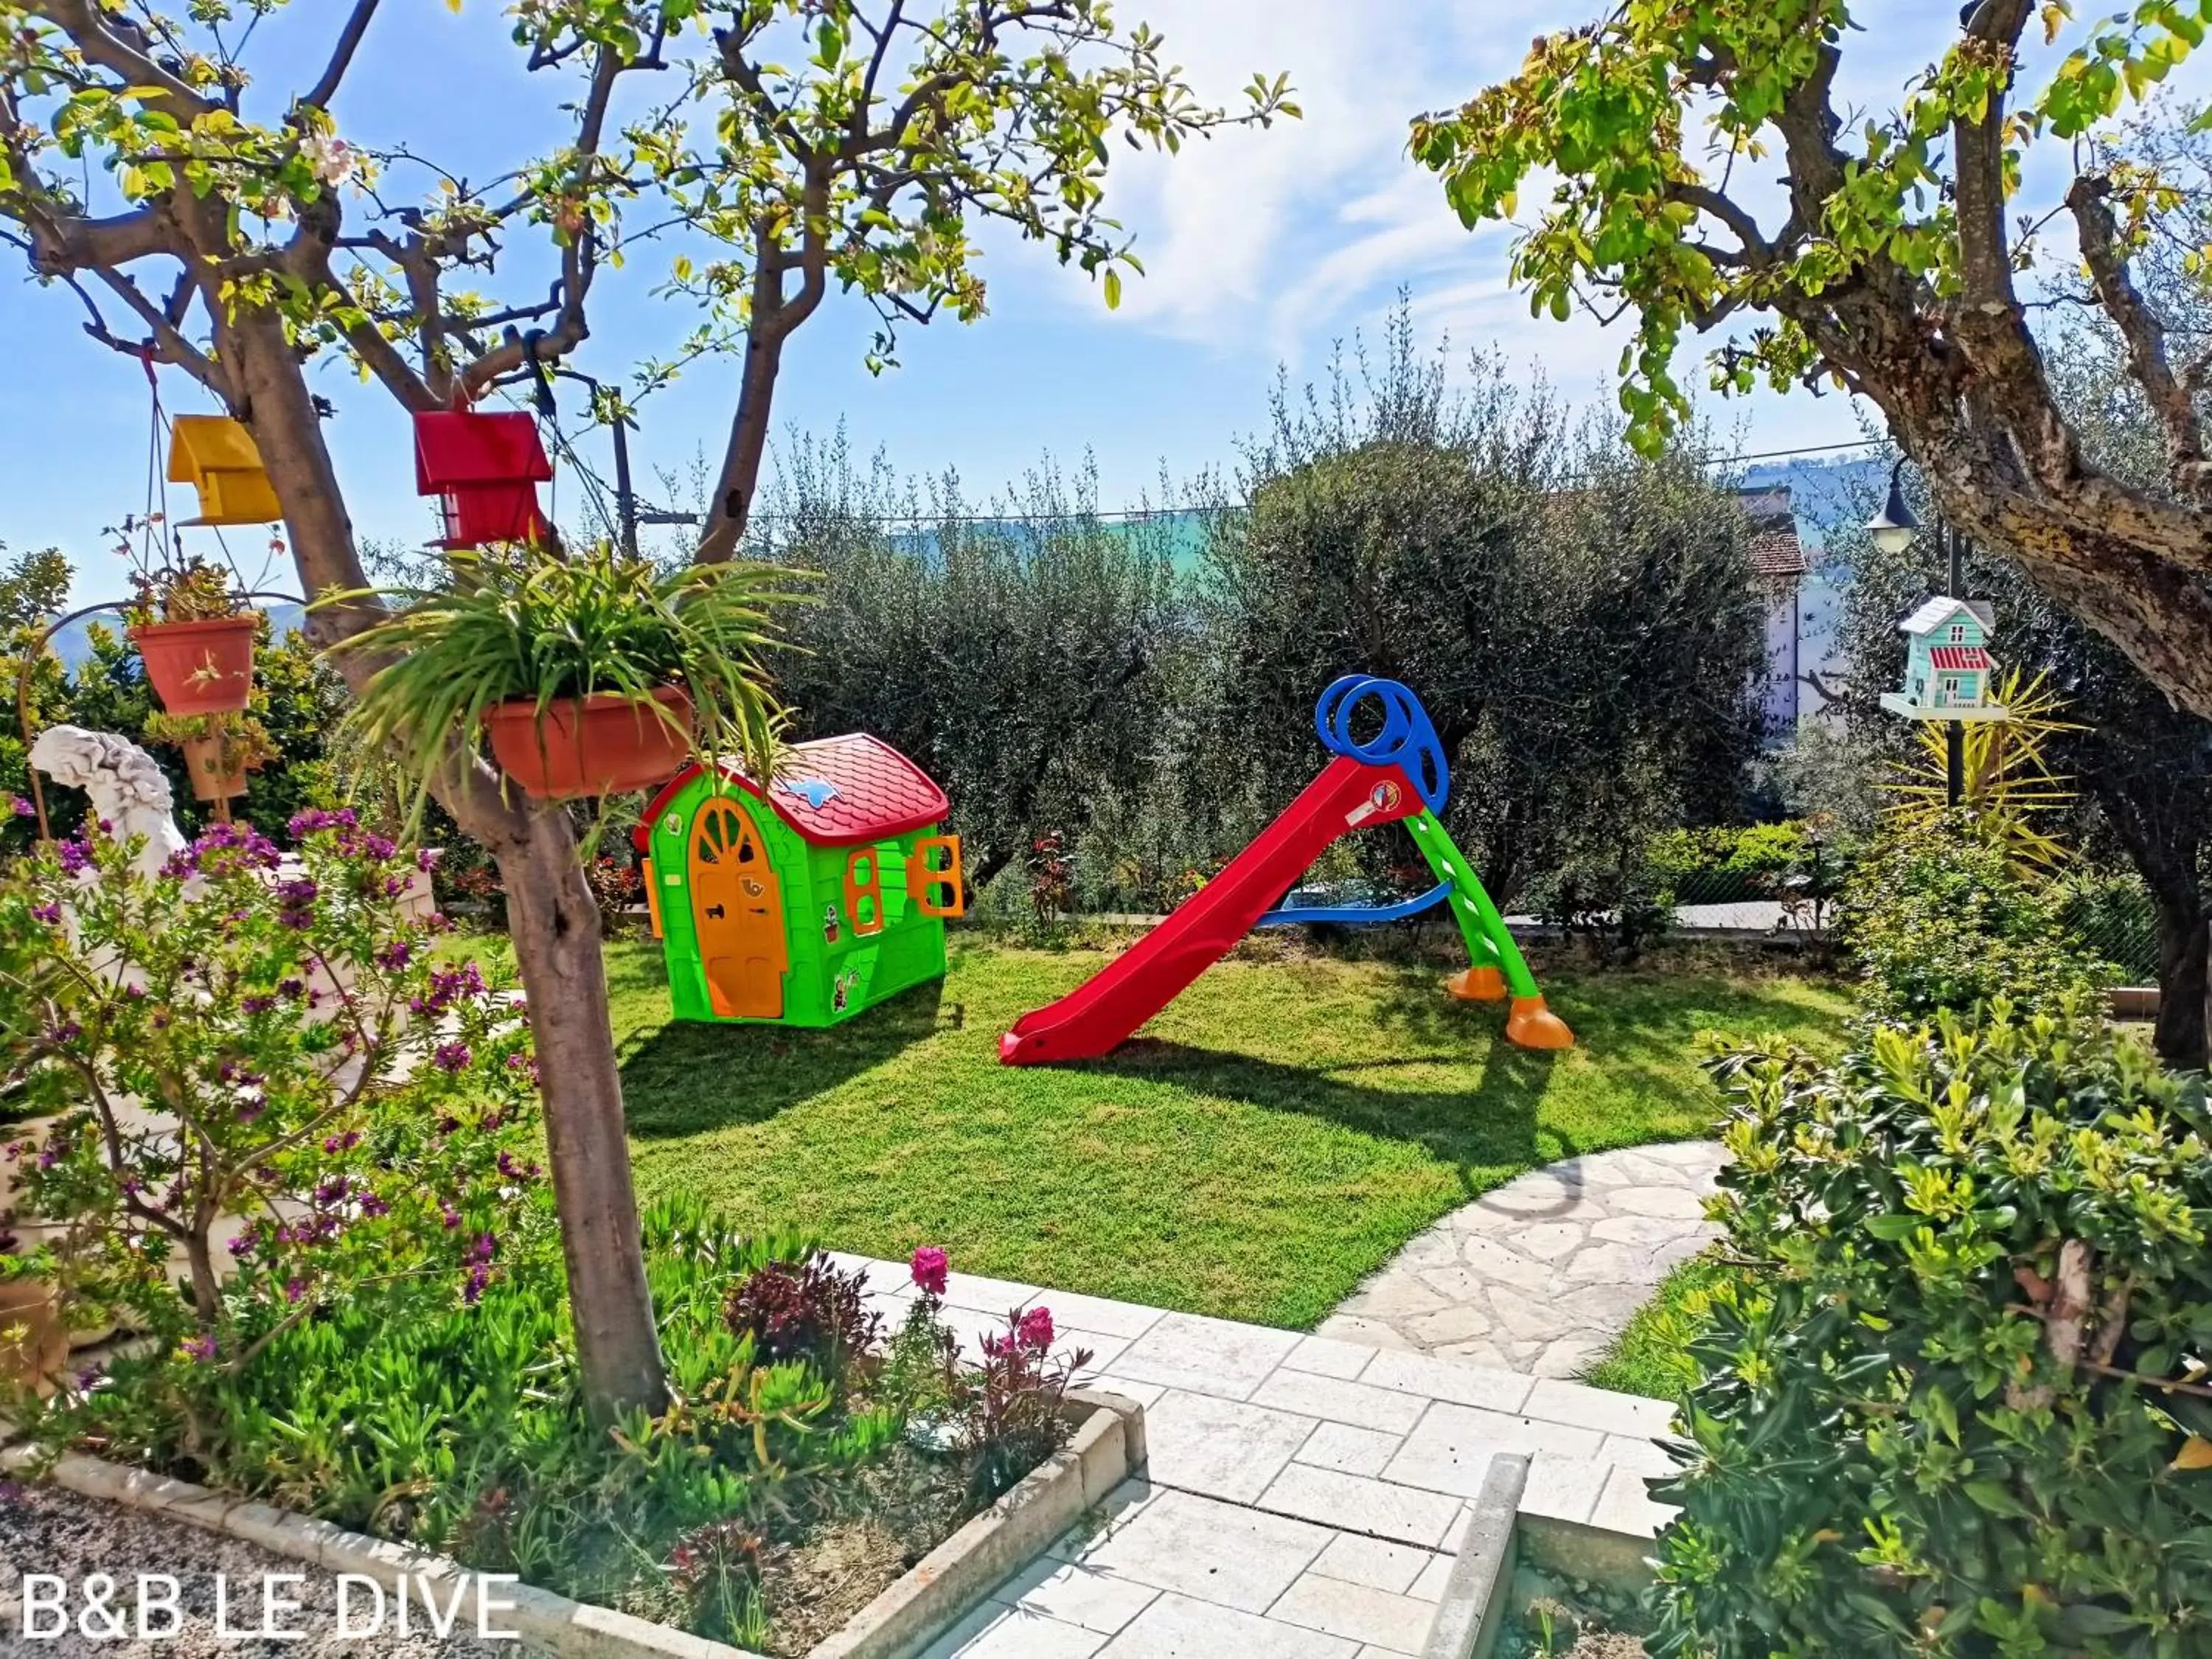 Children's Play Area in B&B Le Dive